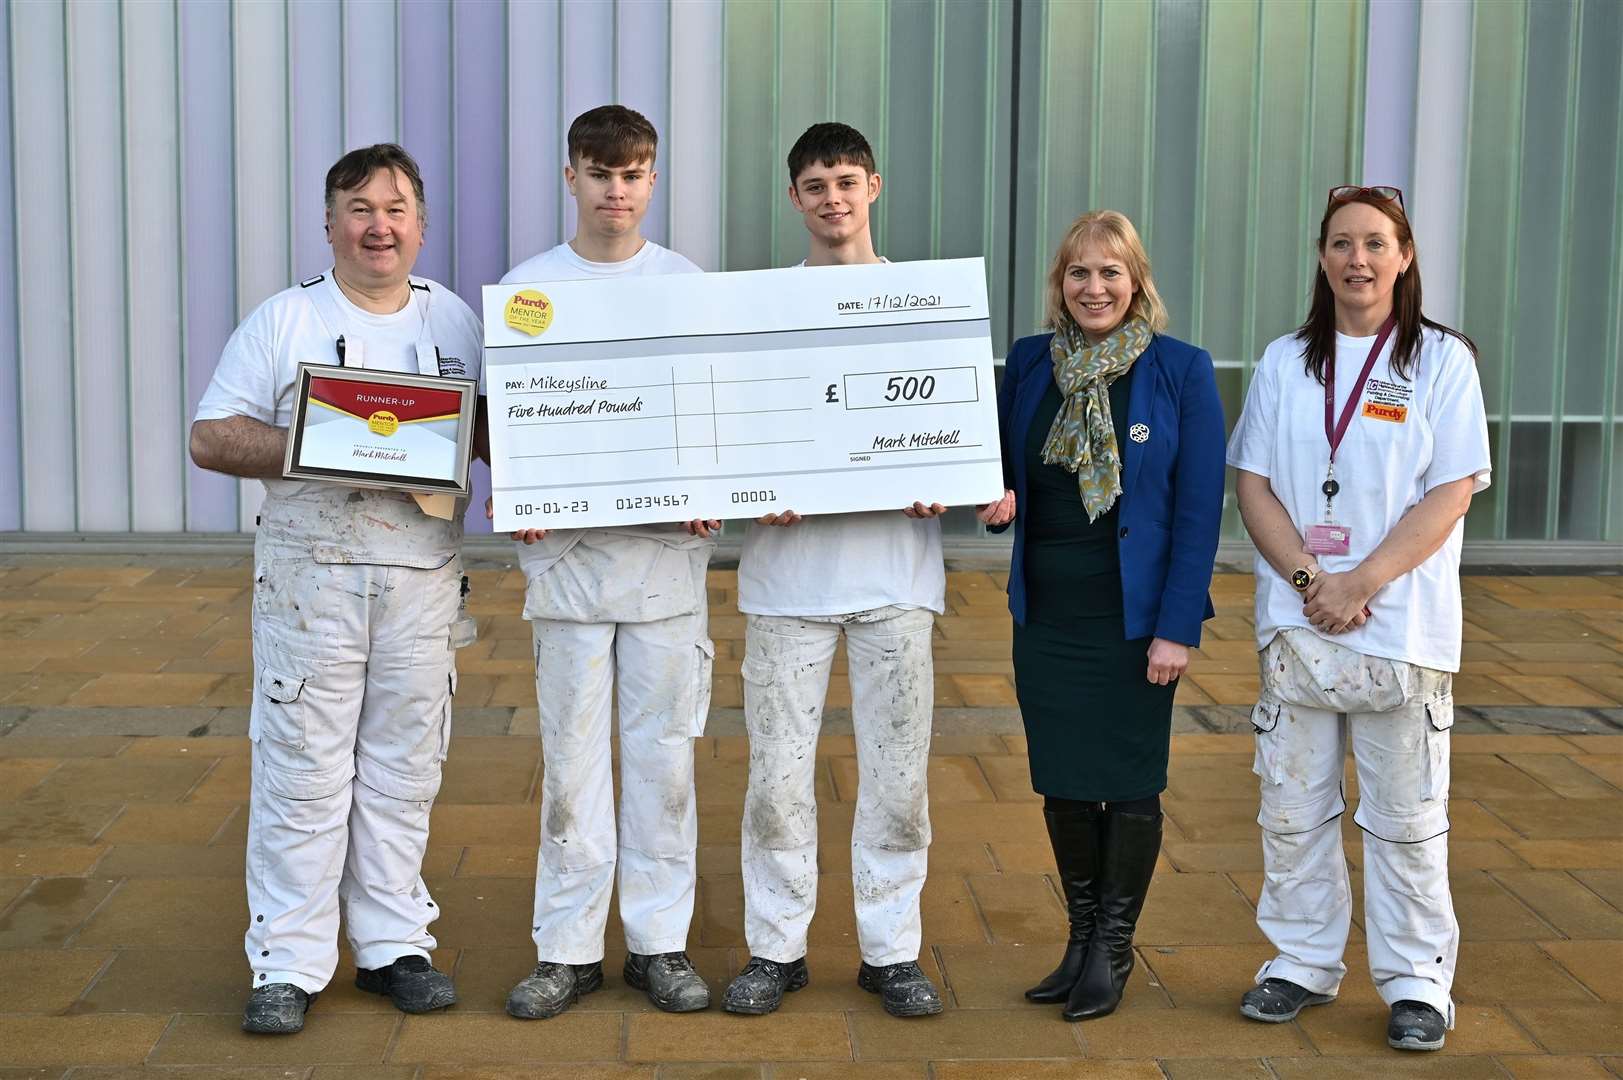 Left to right, Mark Mitchell (painting lecturer), Archie Shaw and Ross Henderson, painting and decorating modern apprentices employed by Henderson Decorators Ltd., Emily Stokes (Mikeysline), Mo Turner (painting lecturer).